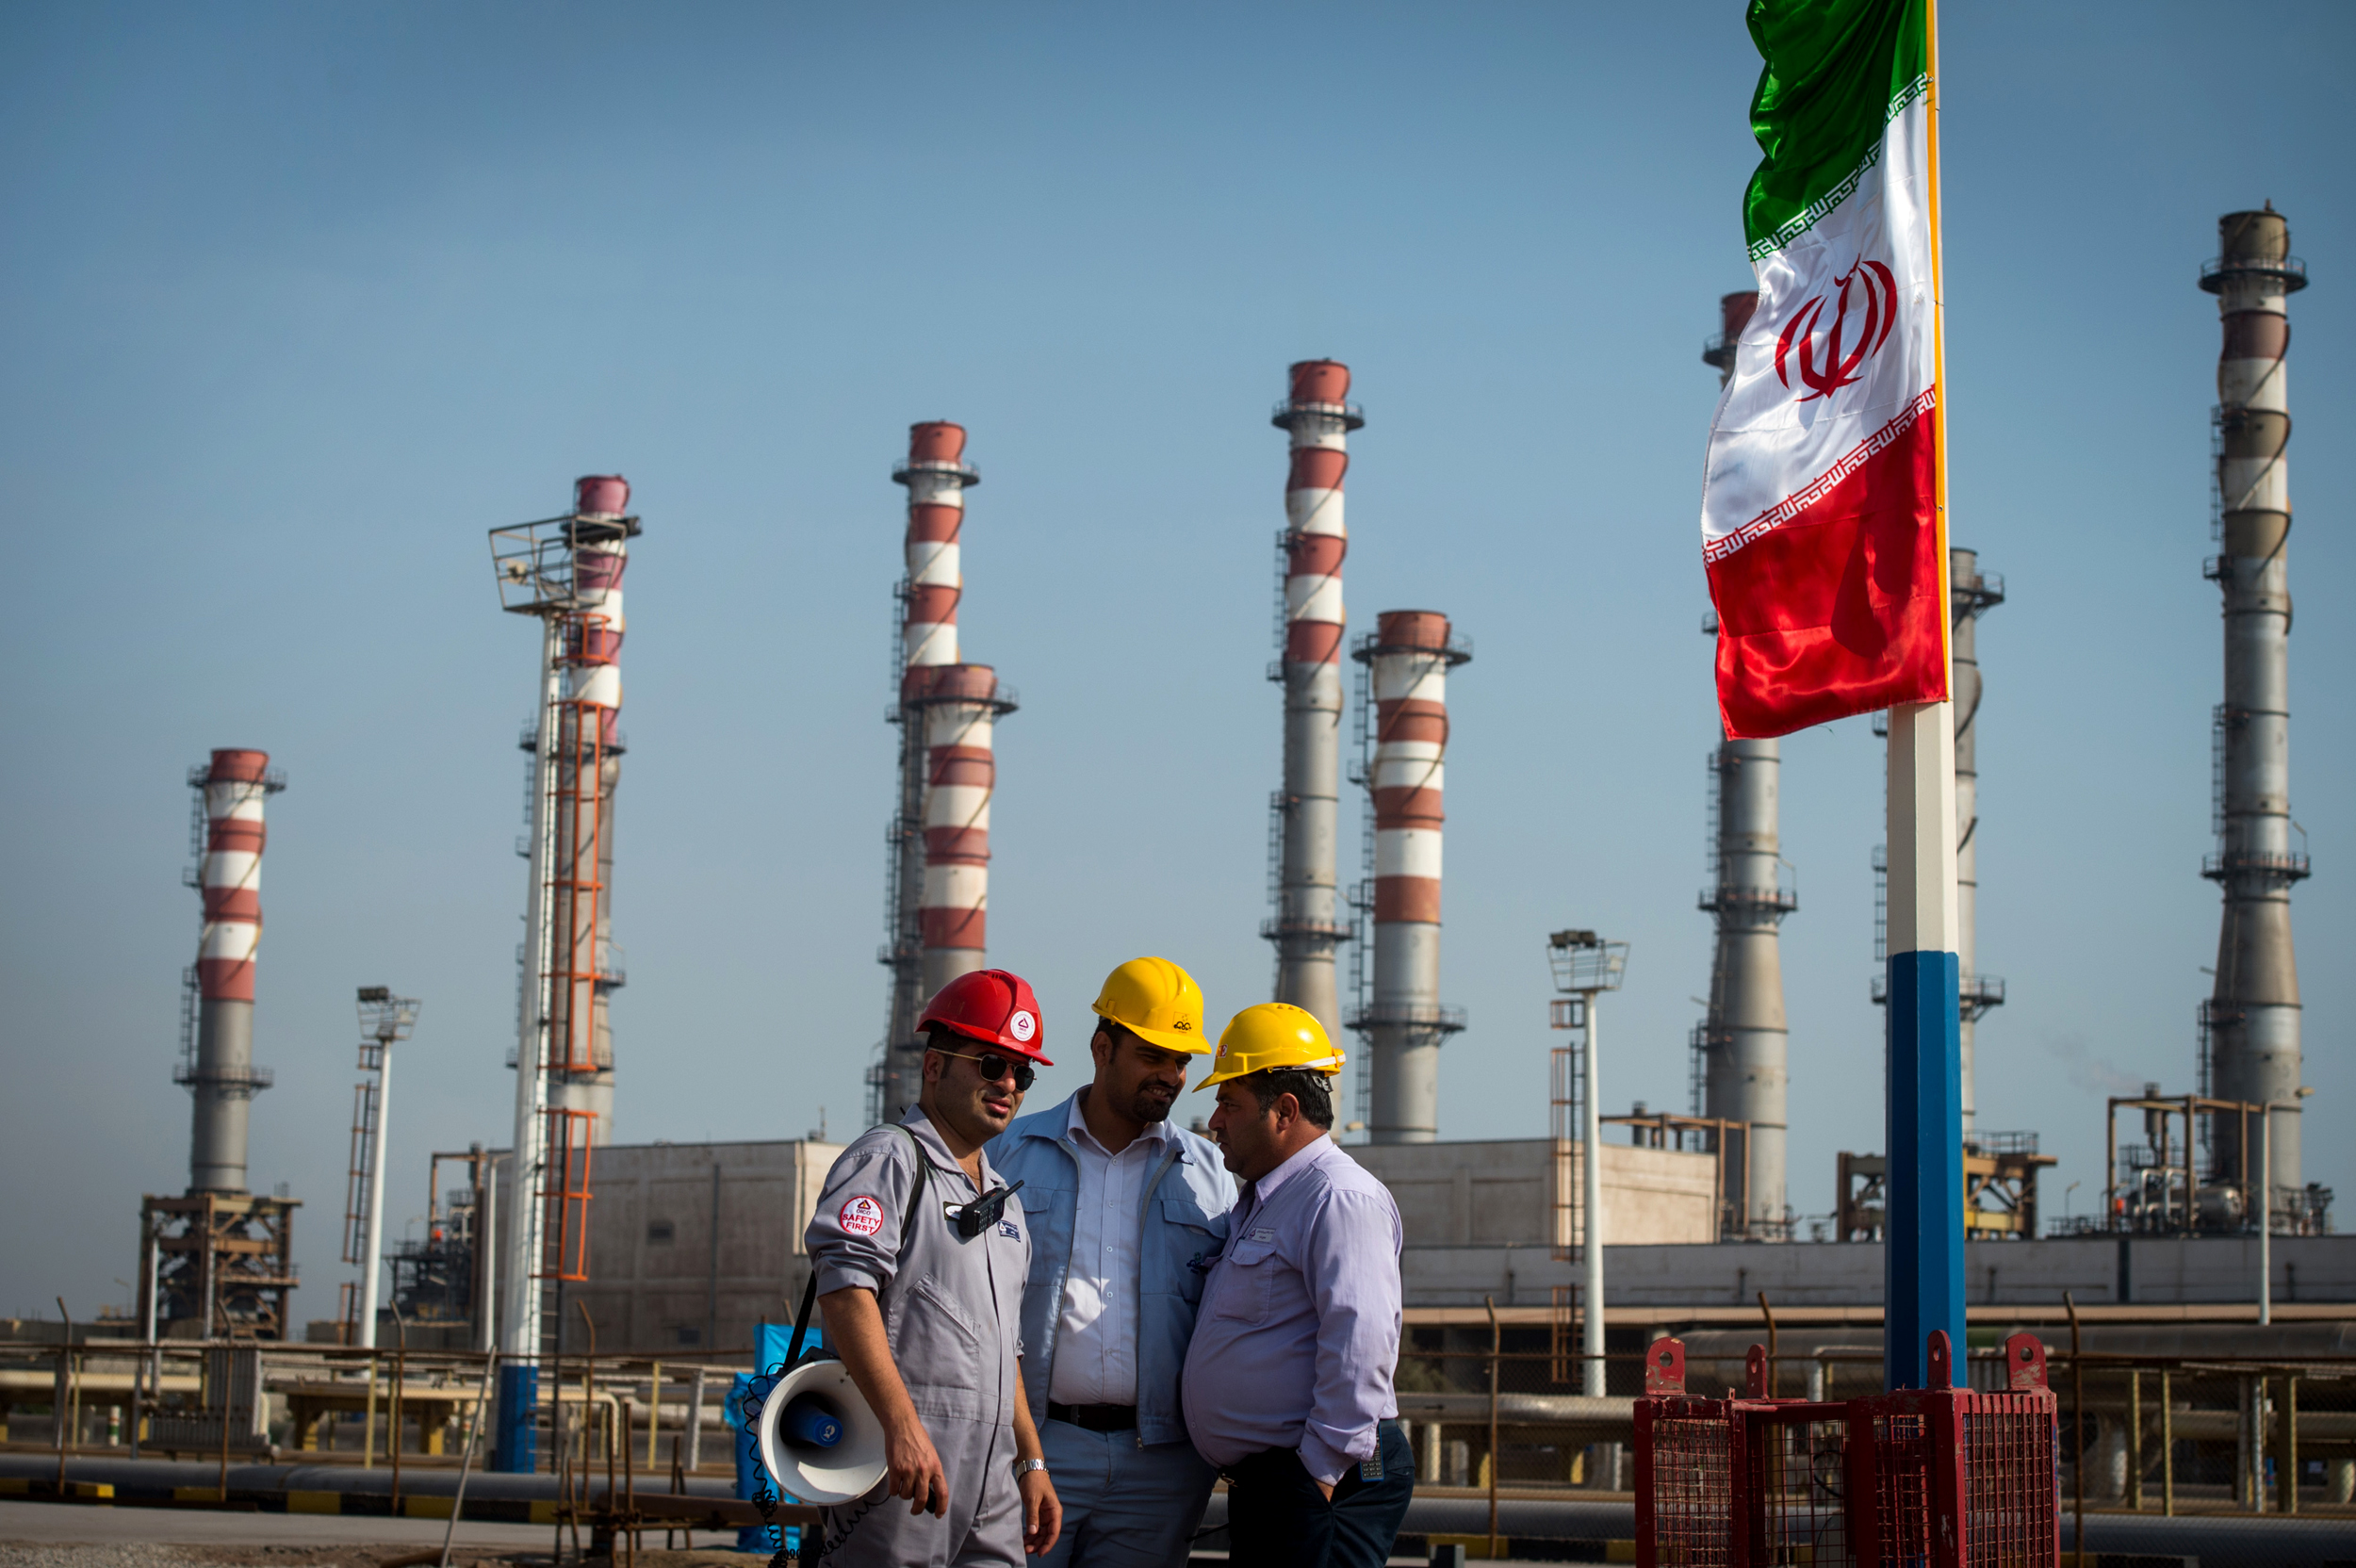 Oil price increases as Iran nuclear talk set on pause